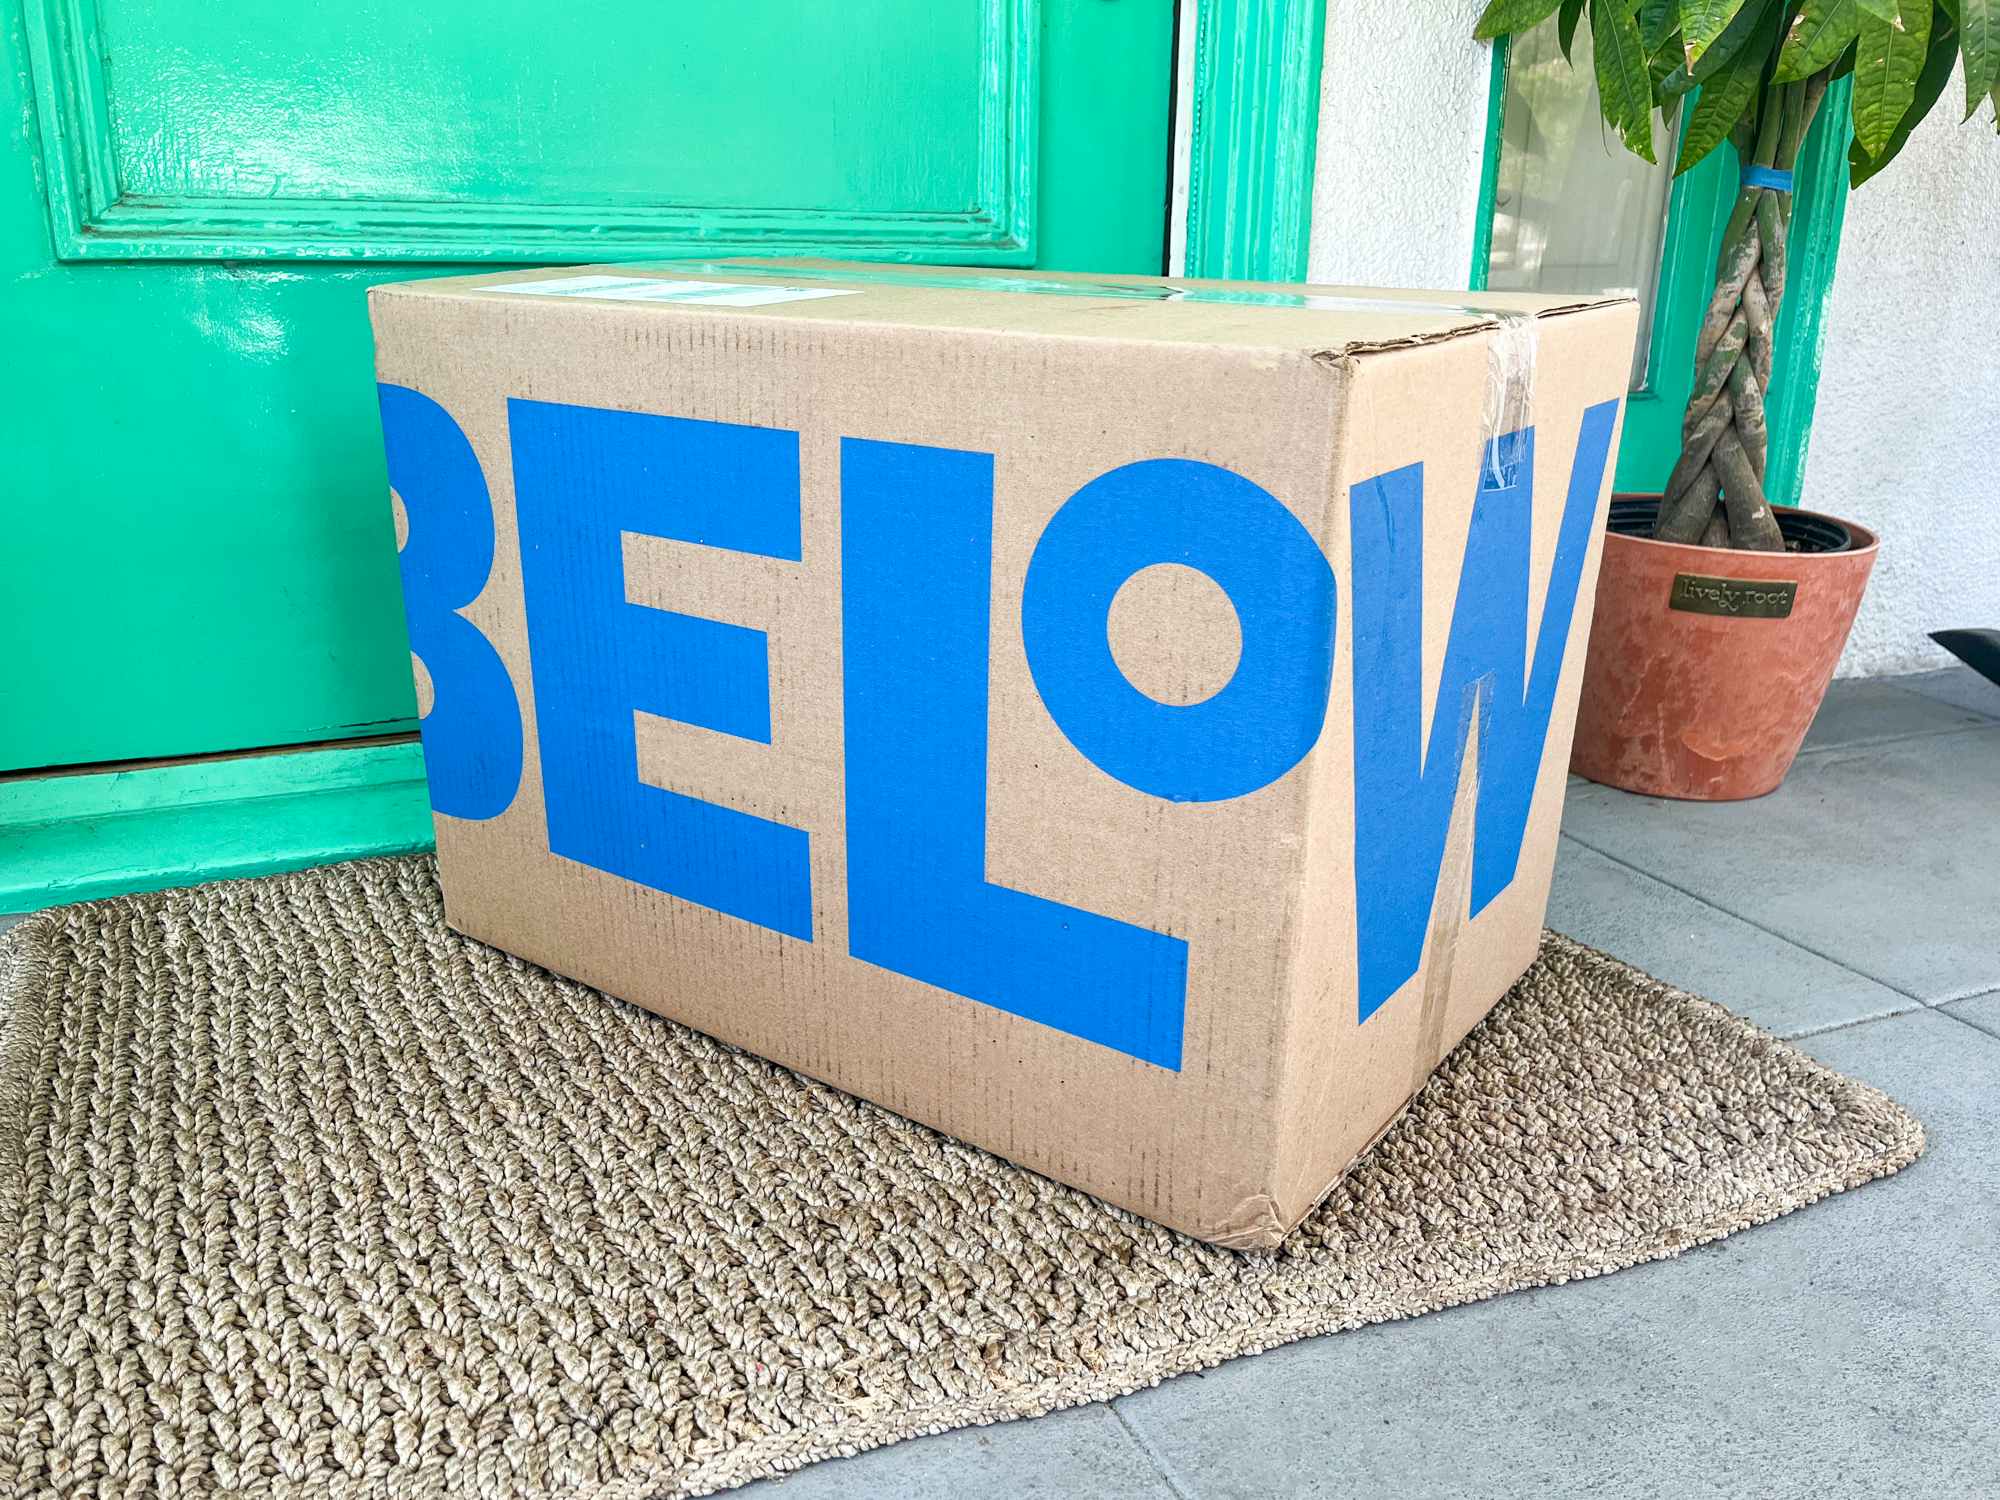 A Five Below box sitting on a front porch